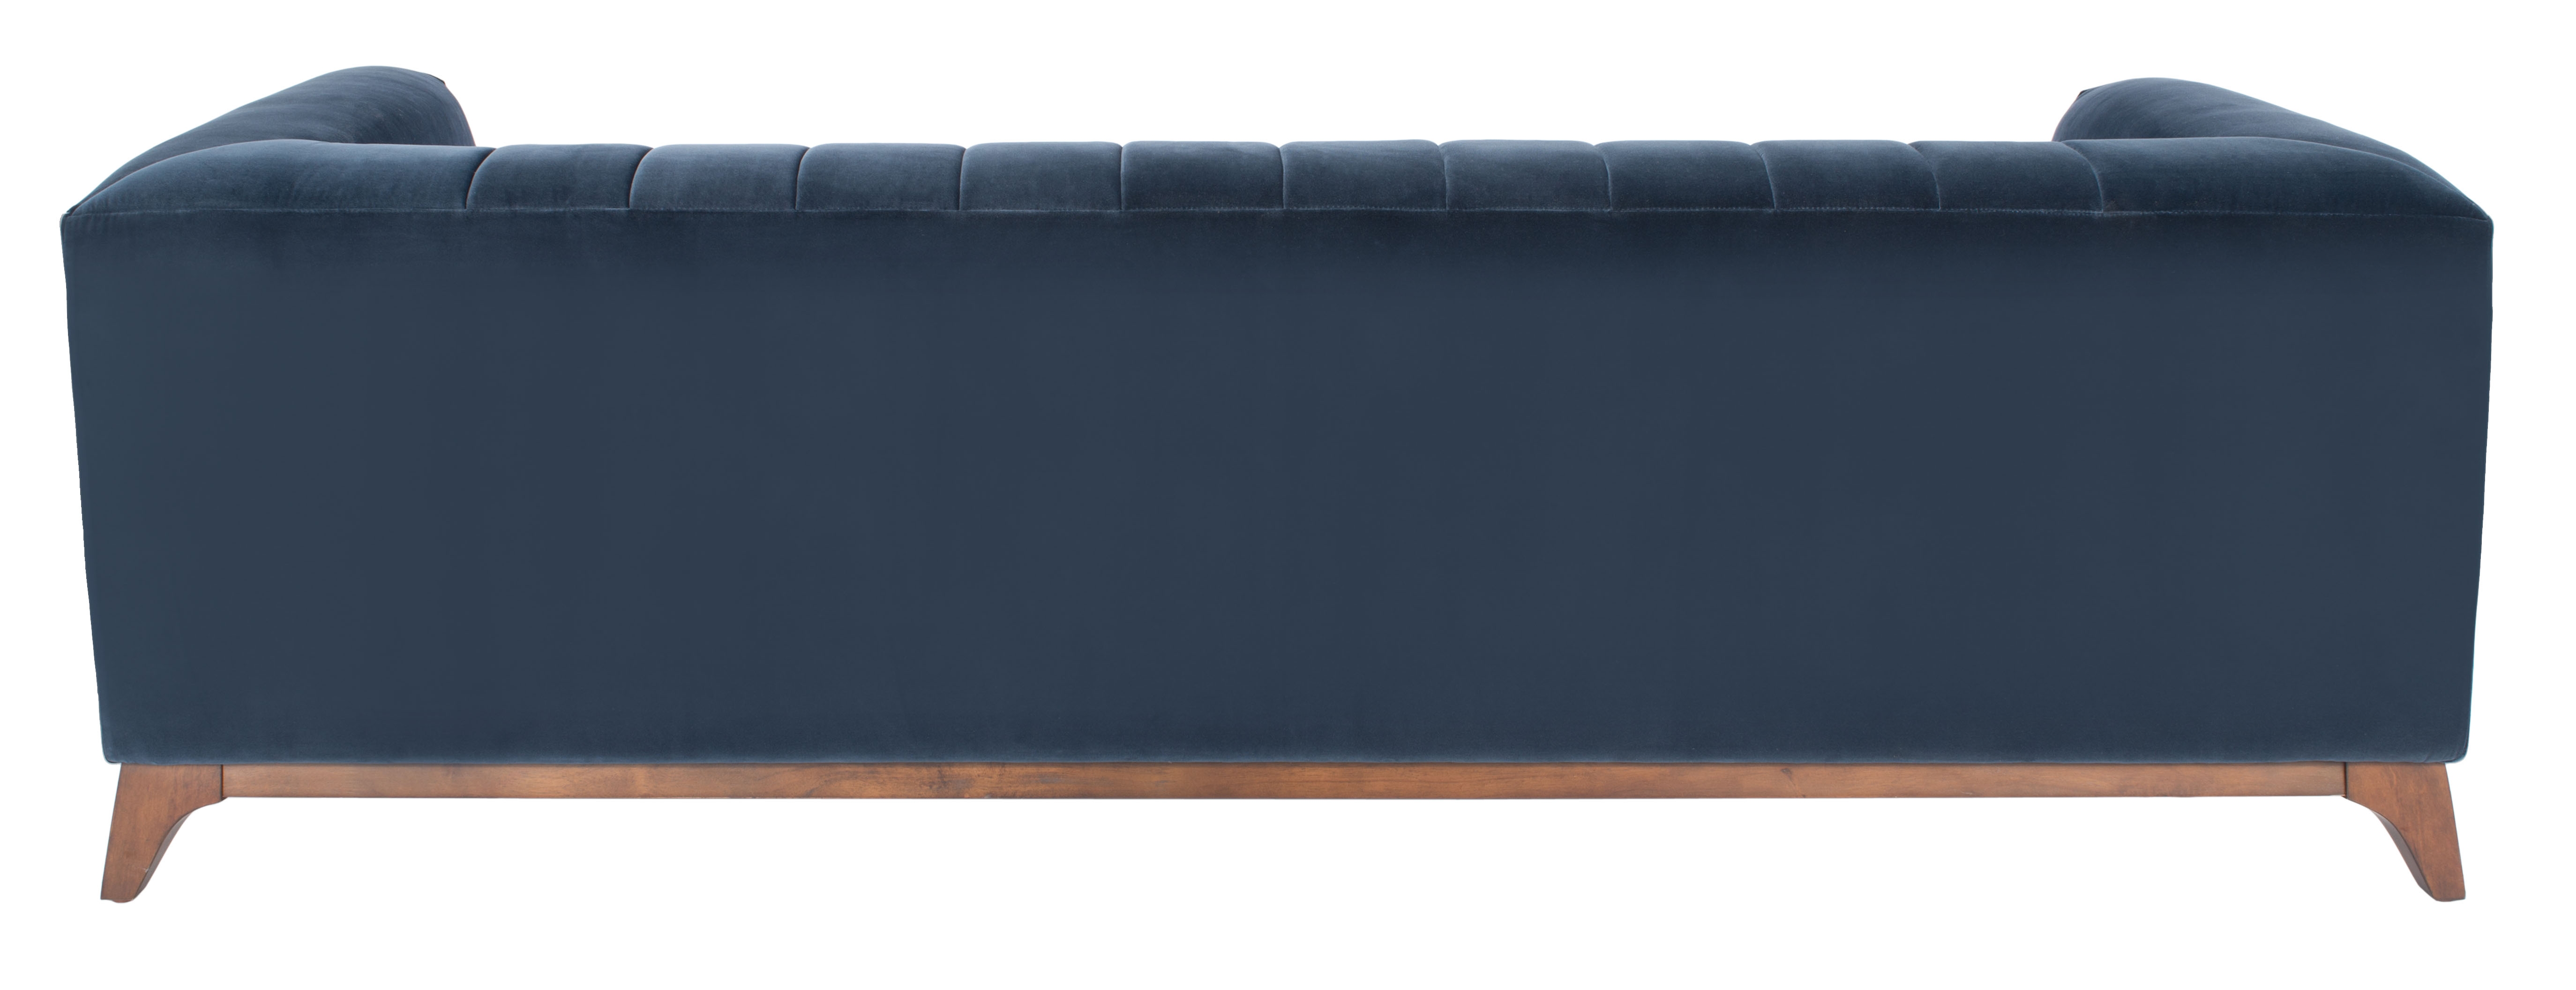 Dixie Channel Tufted Sofa - Navy - Arlo Home - Image 3